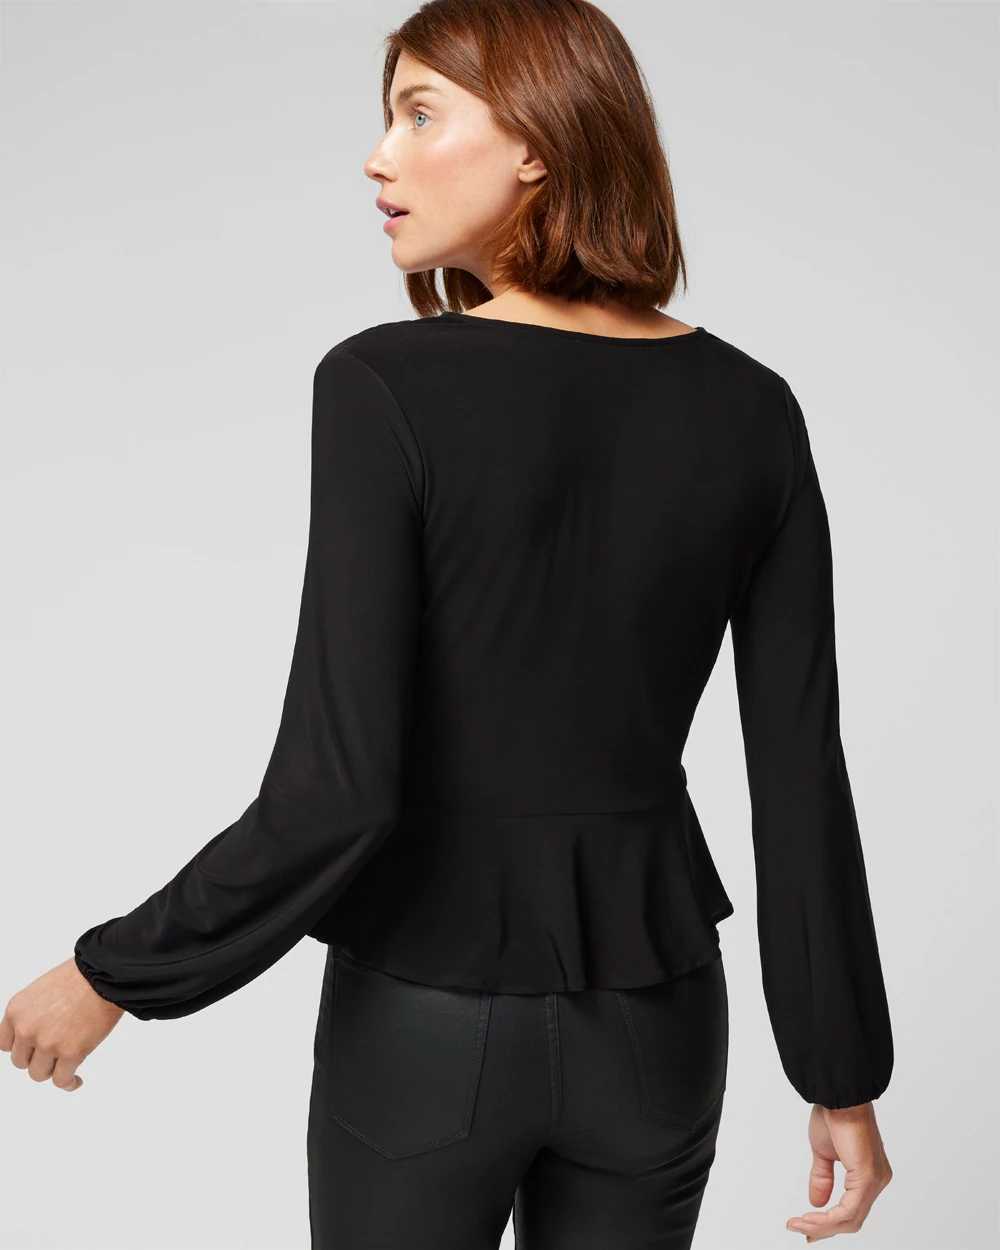 Long Sleeve Button Side Matte Jersey Peplum Top click to view larger image.